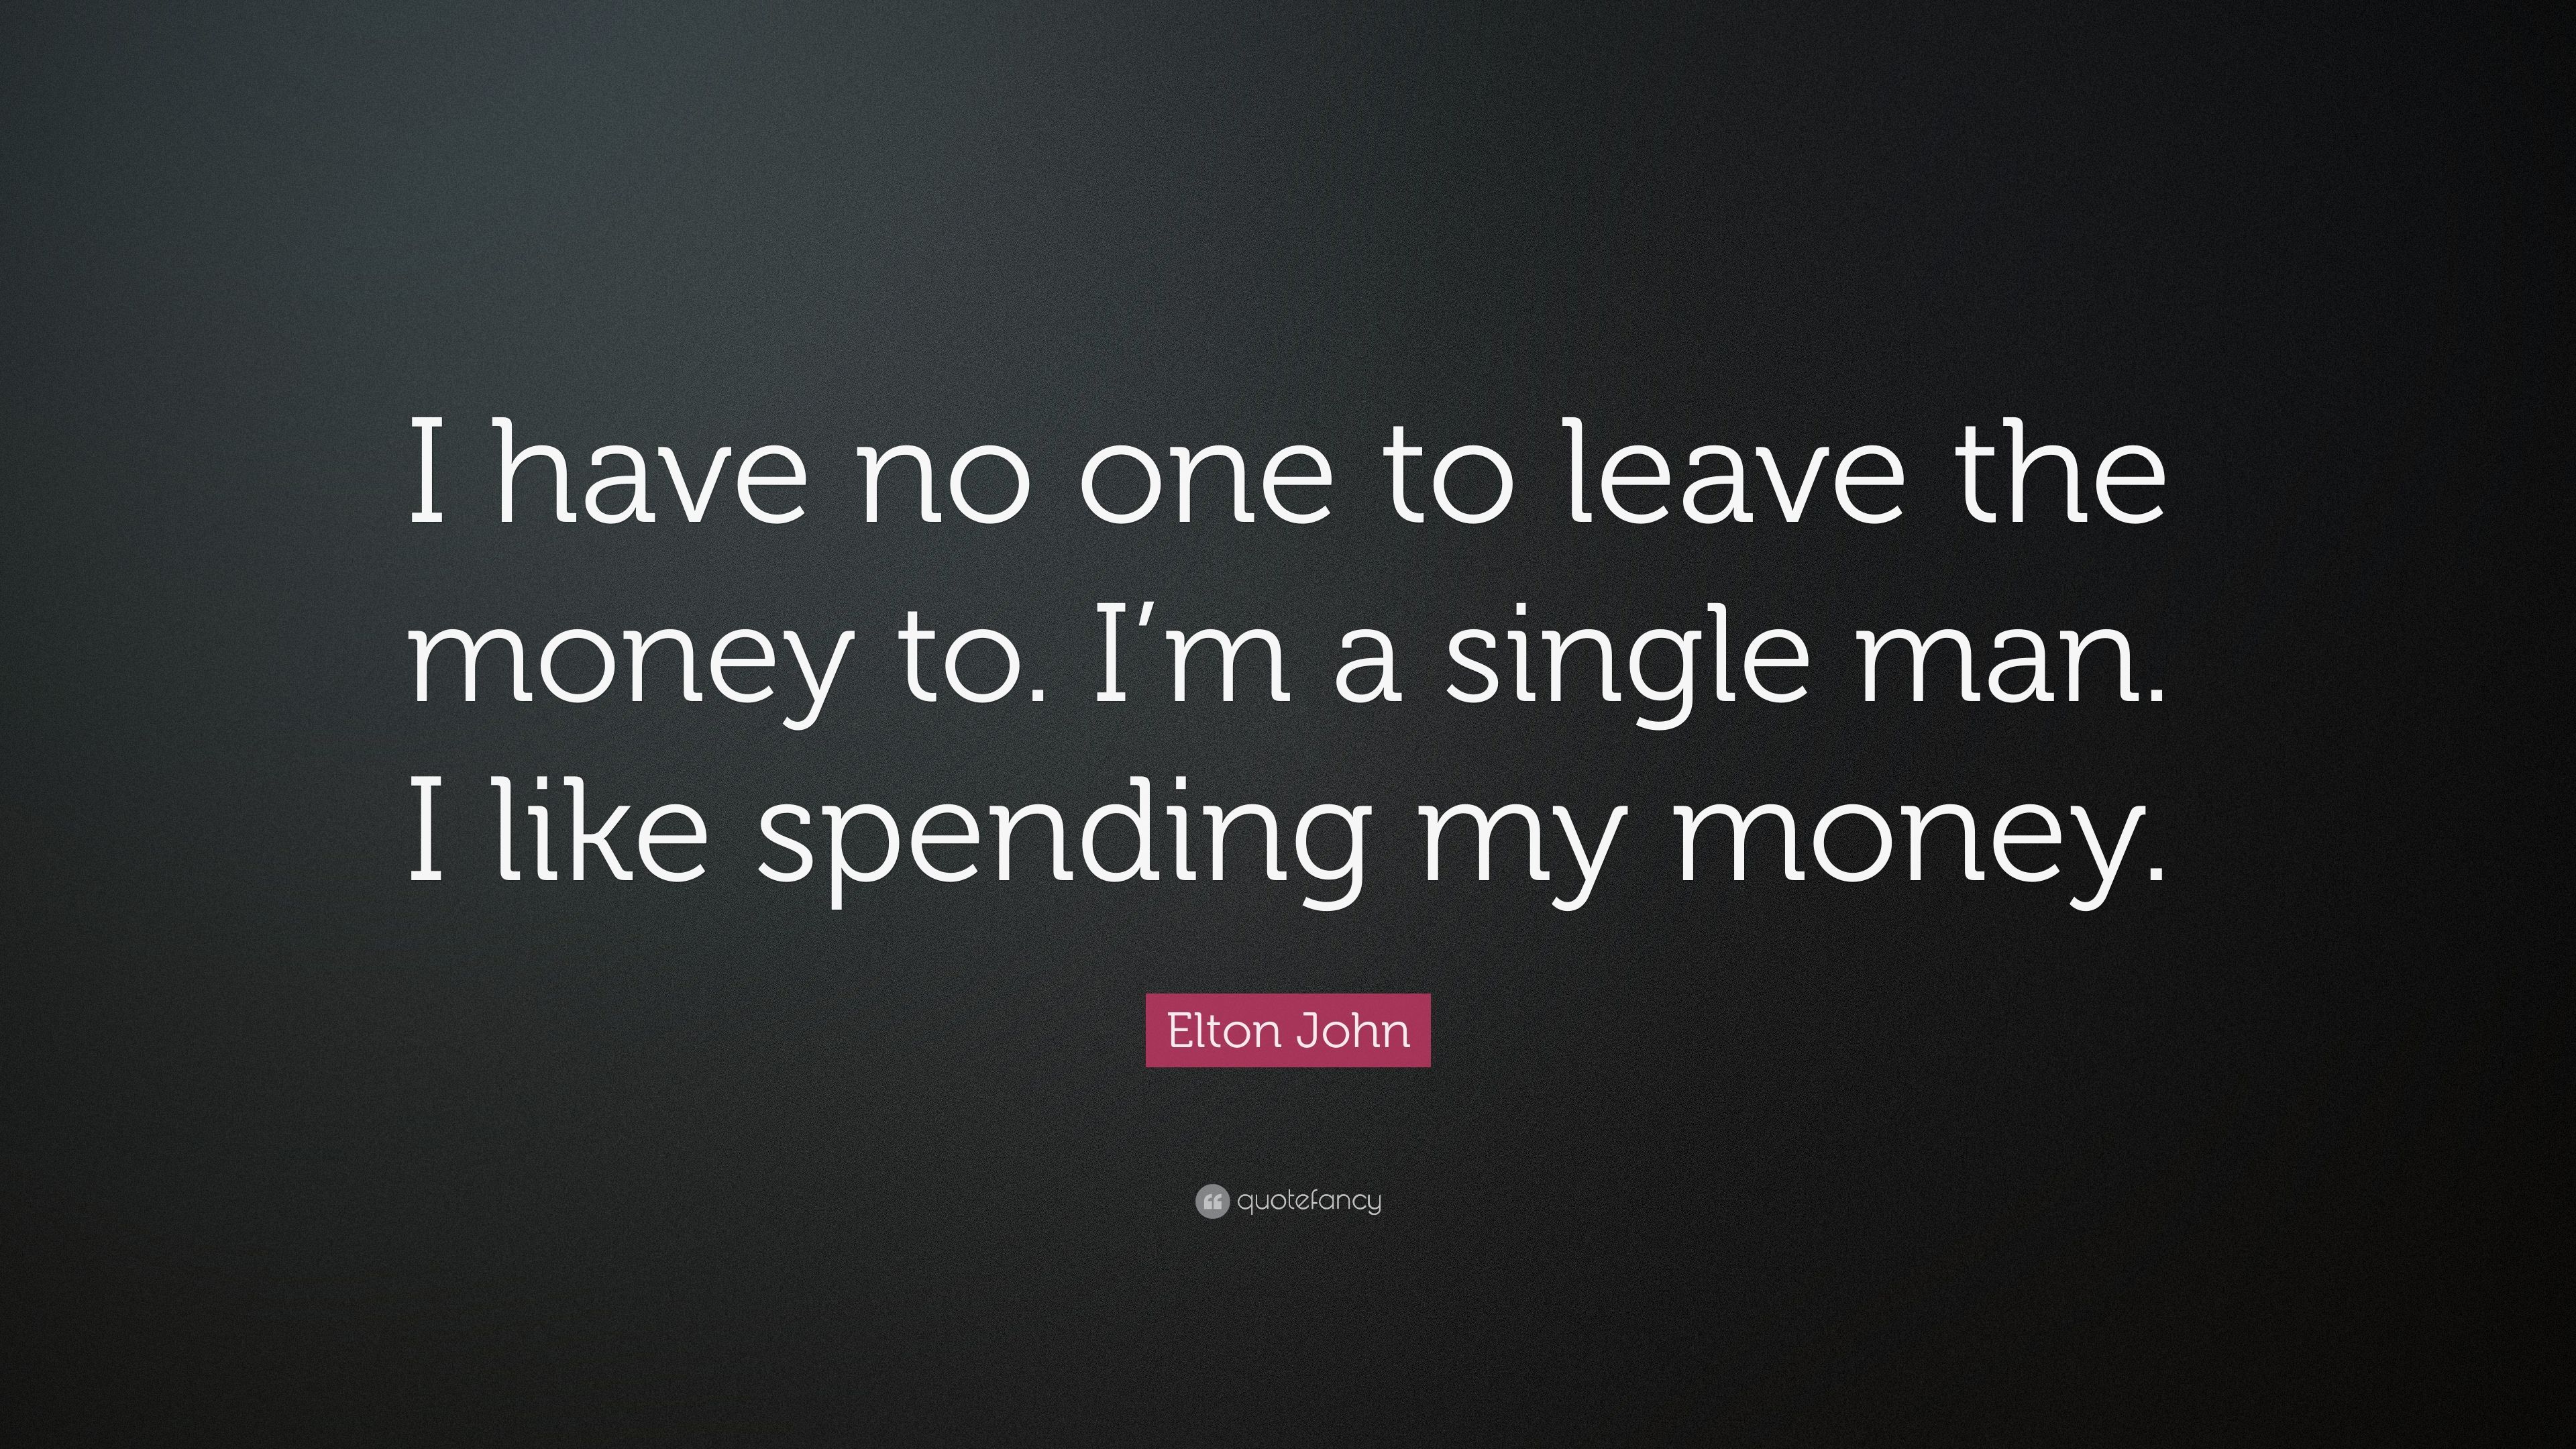 Elton John Quote: “I have no one to leave the money to. I'm a